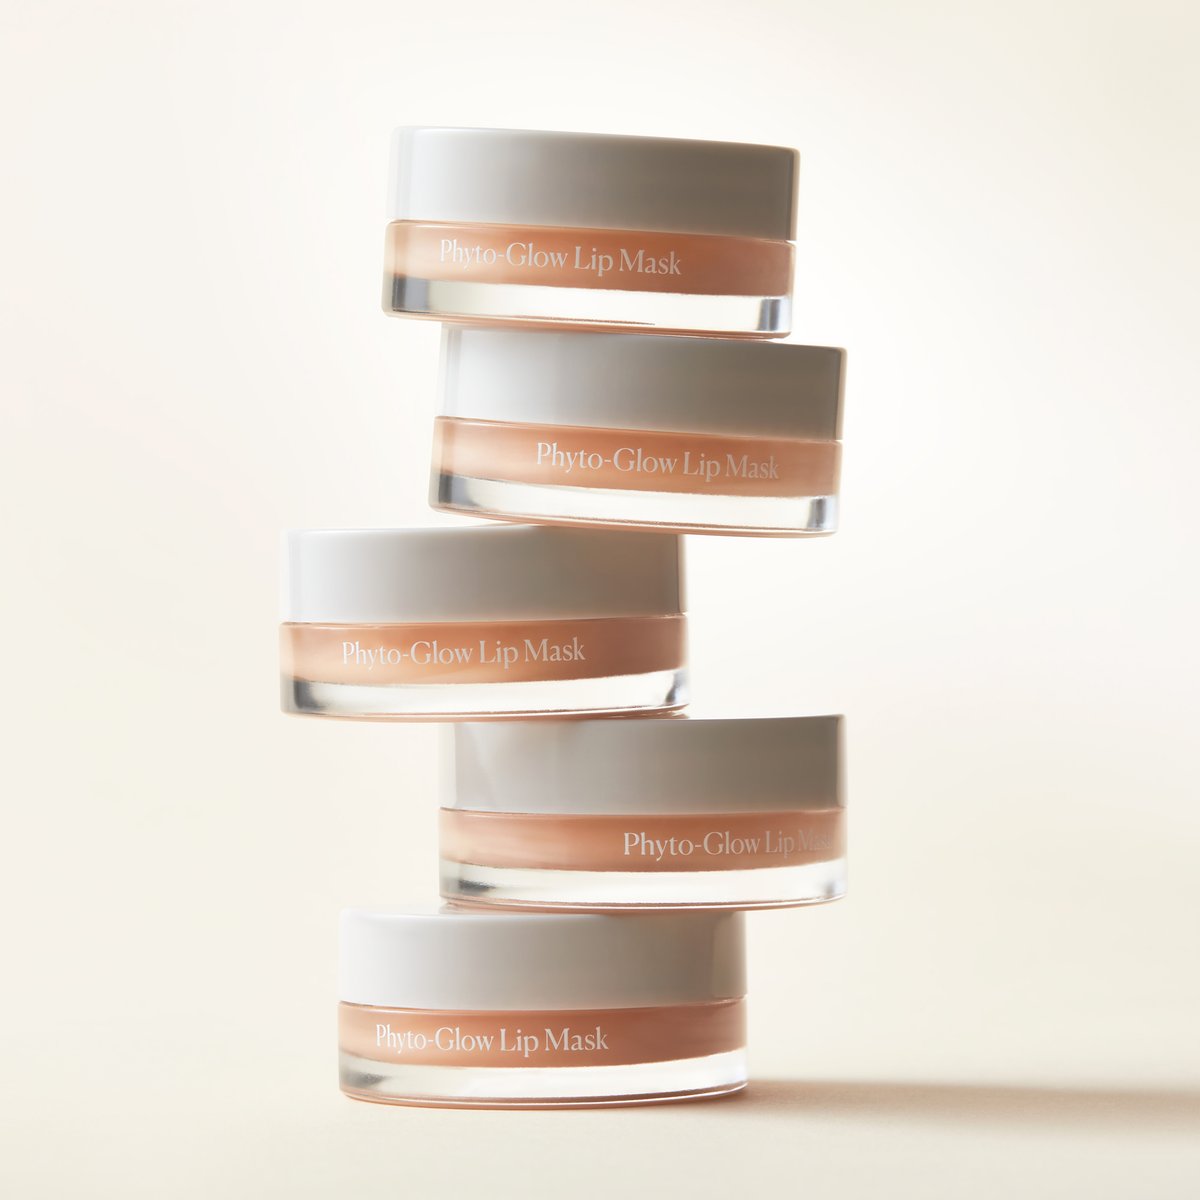 Say goodbye to dry, chapped lips this winter. ❄️ Key ingredients in our new Phyto-Glow Lip Mask:

✨ Shea & Capuaçu Butter
✨ Avocado & Jojoba Oil
✨ Kukui Nut Oil
✨ Stearyl Glycyrrhetinate

Only available at Naturium.com: bit.ly/4aWMPZs